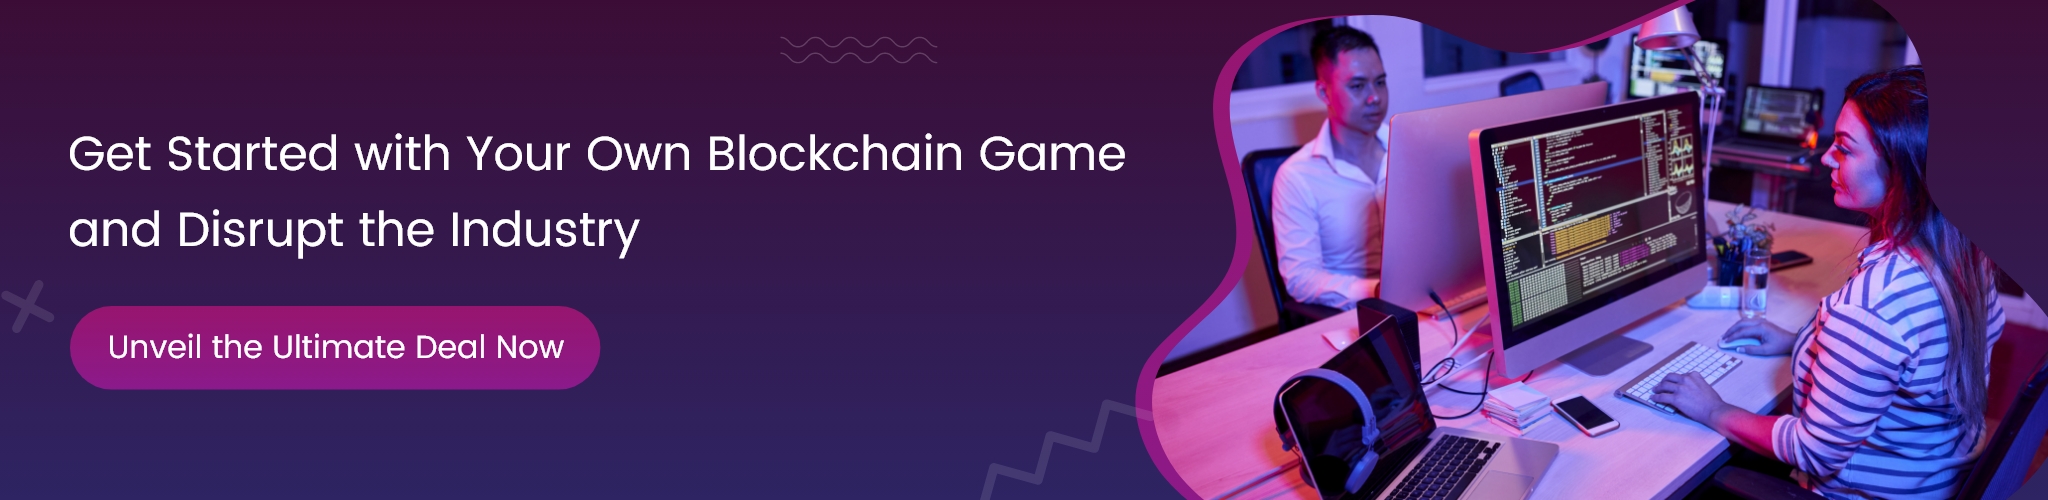 Build your own blockchain game